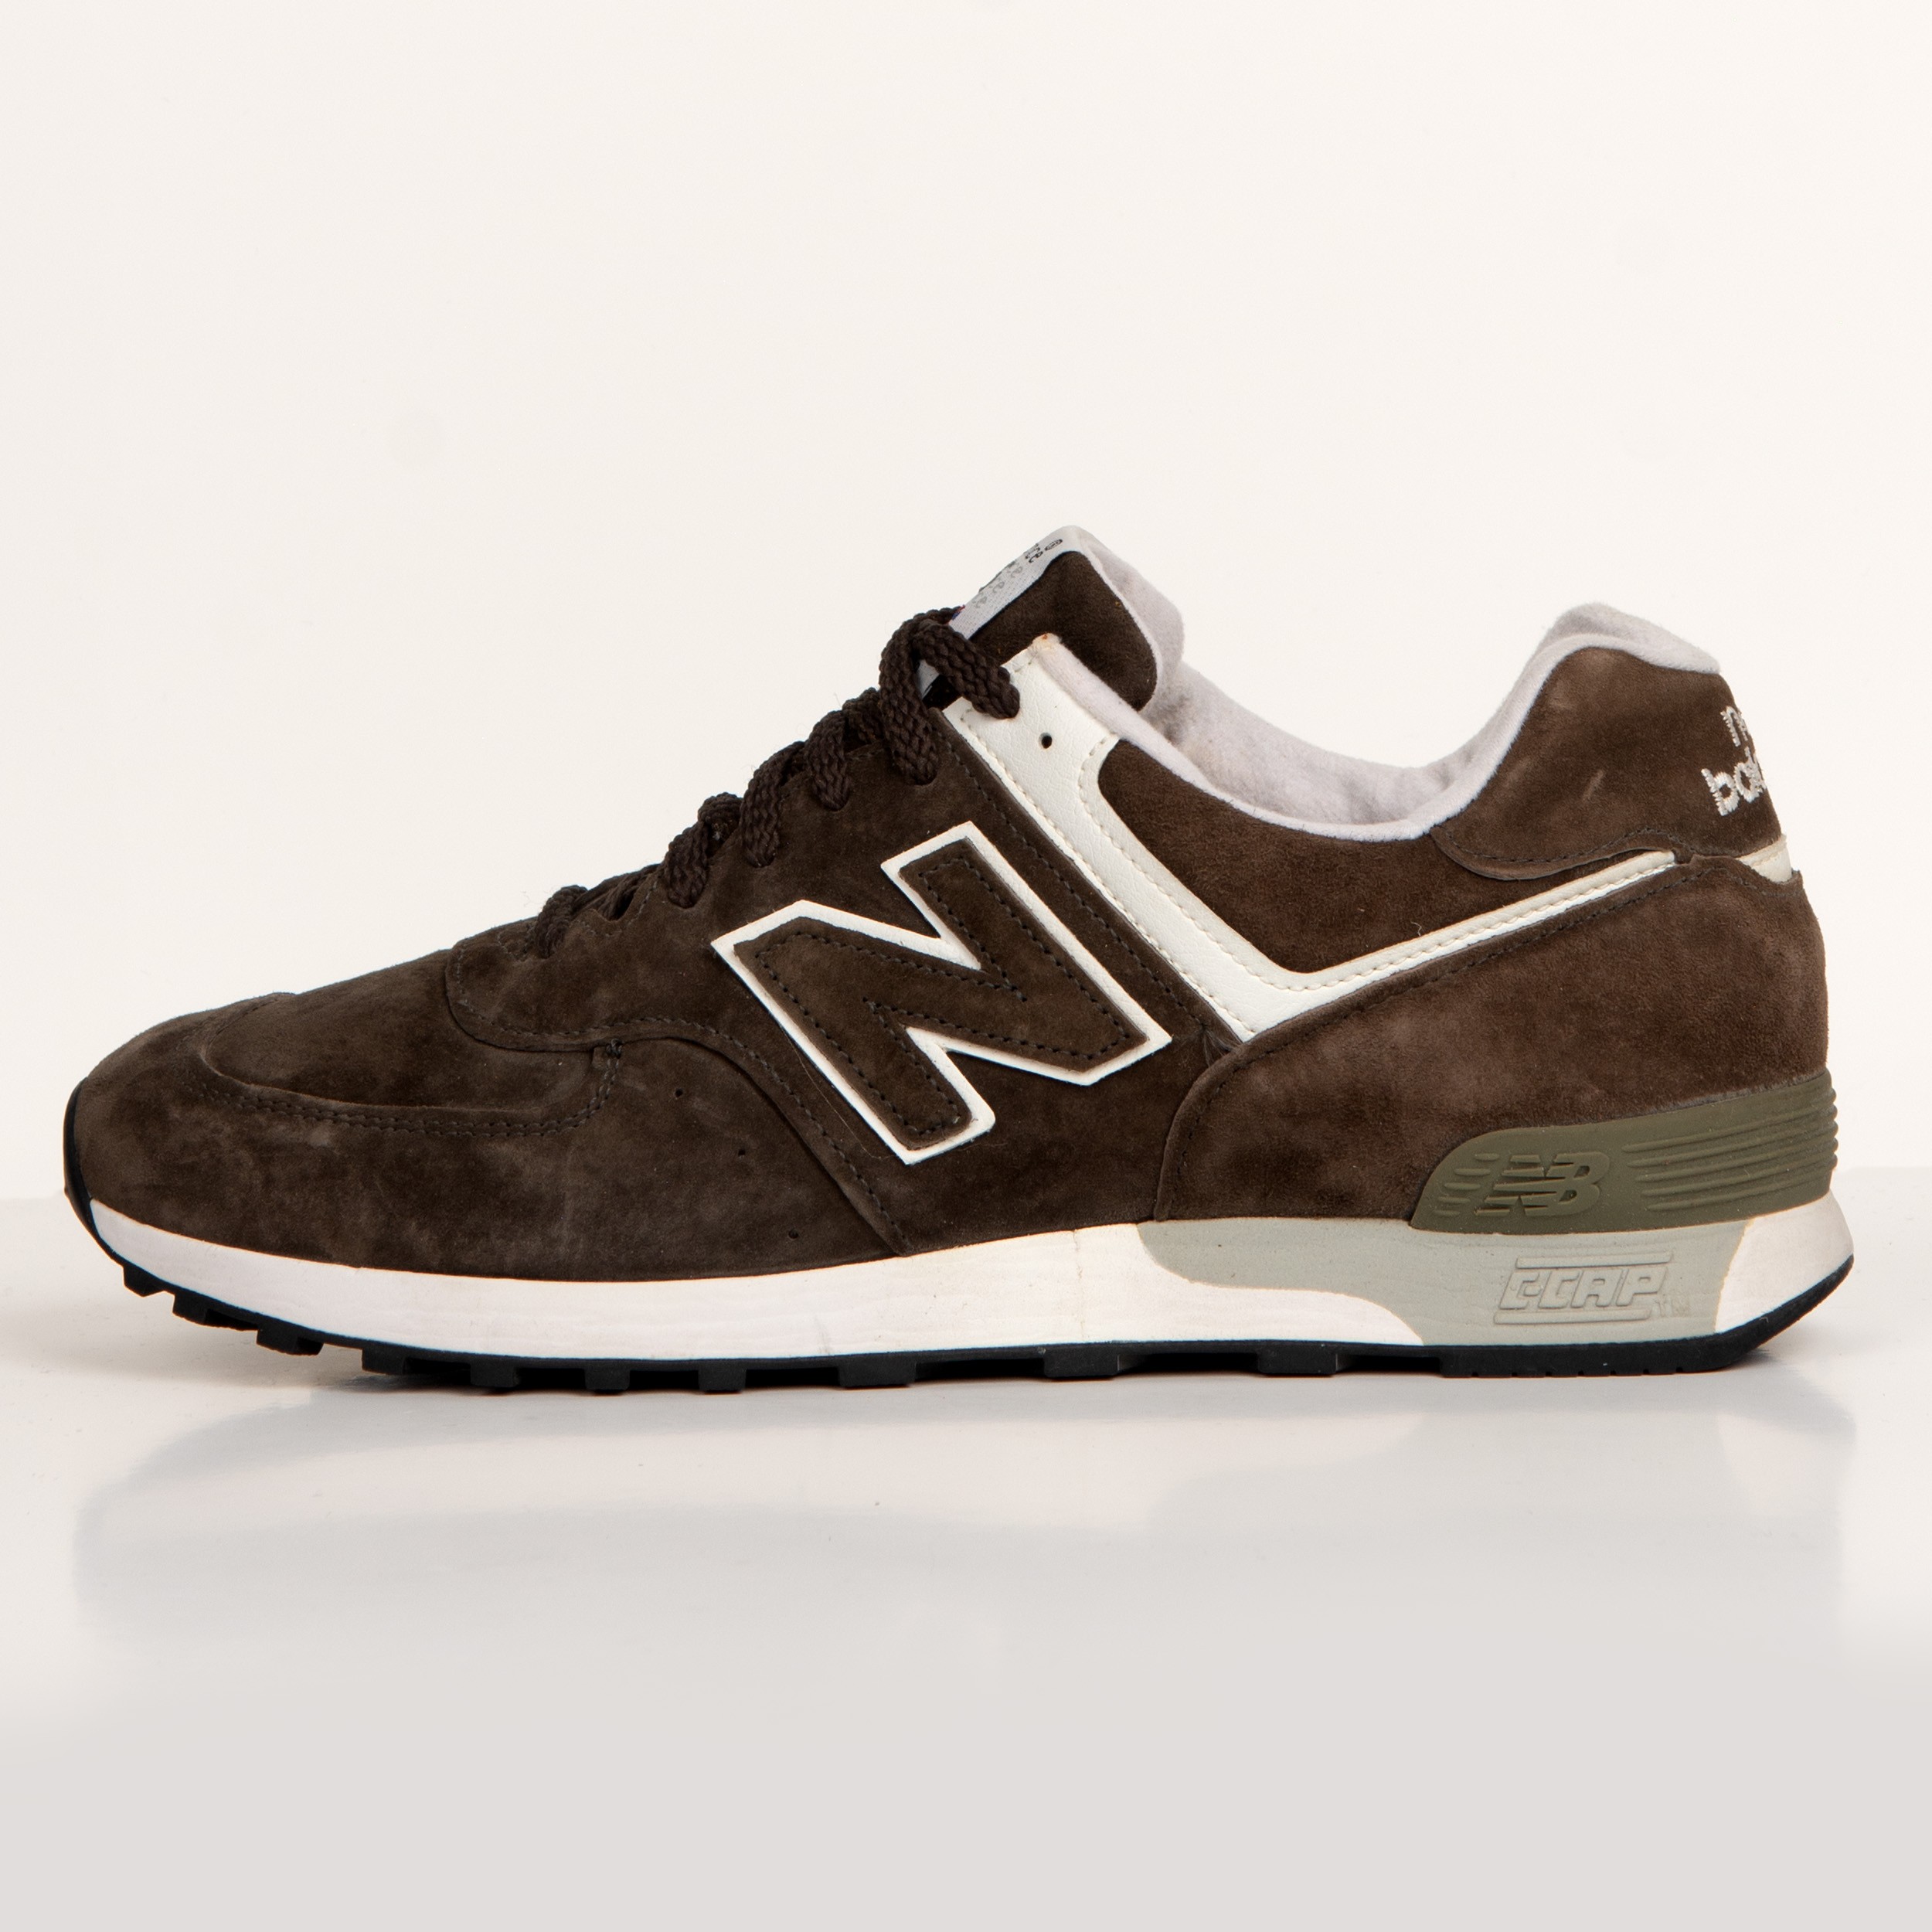 RE-POCKETS NEW BALANCE TRAINERS 576 BROWN